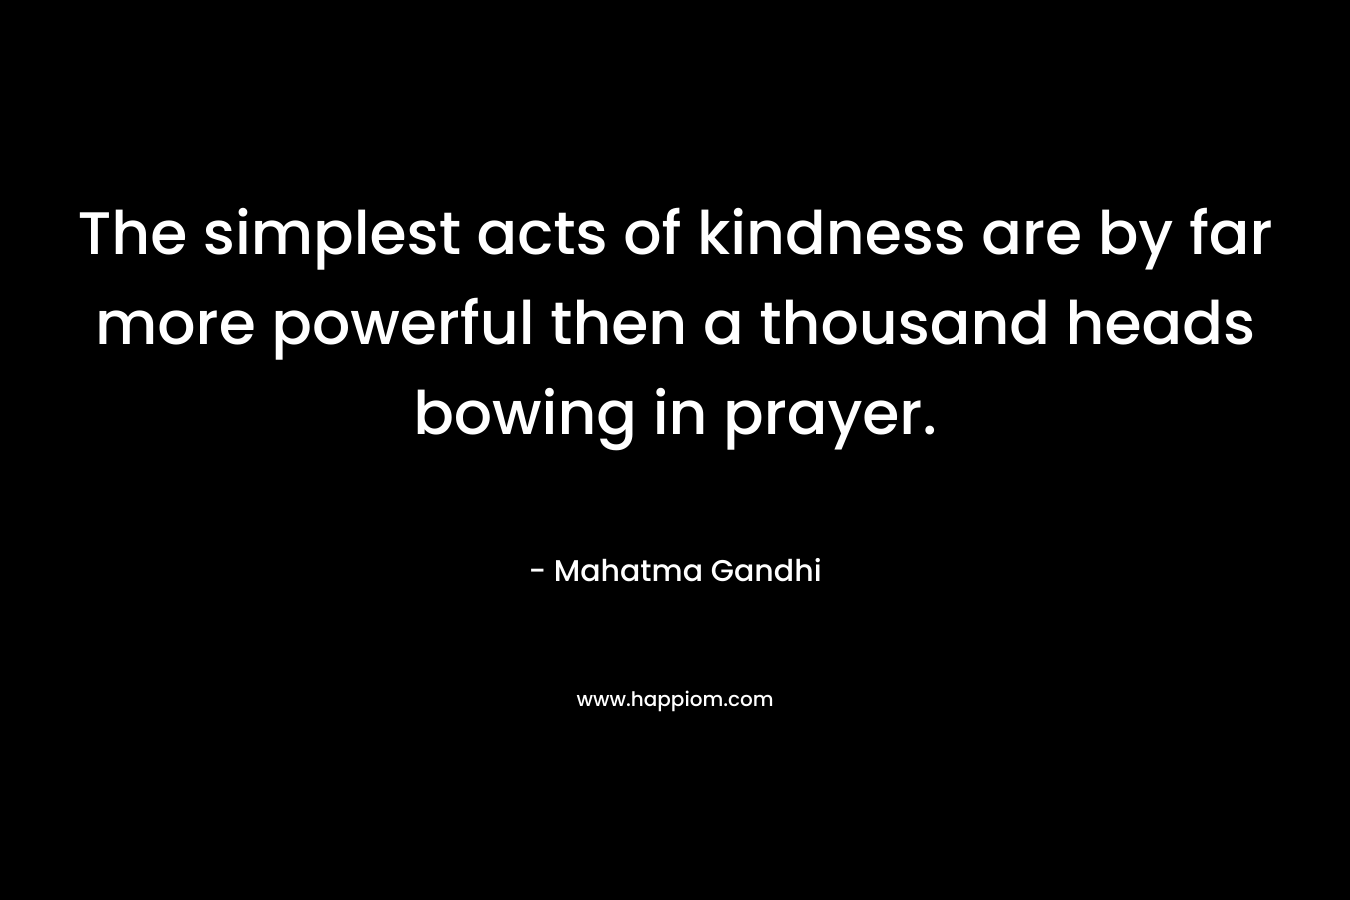 The simplest acts of kindness are by far more powerful then a thousand heads bowing in prayer. – Mahatma Gandhi